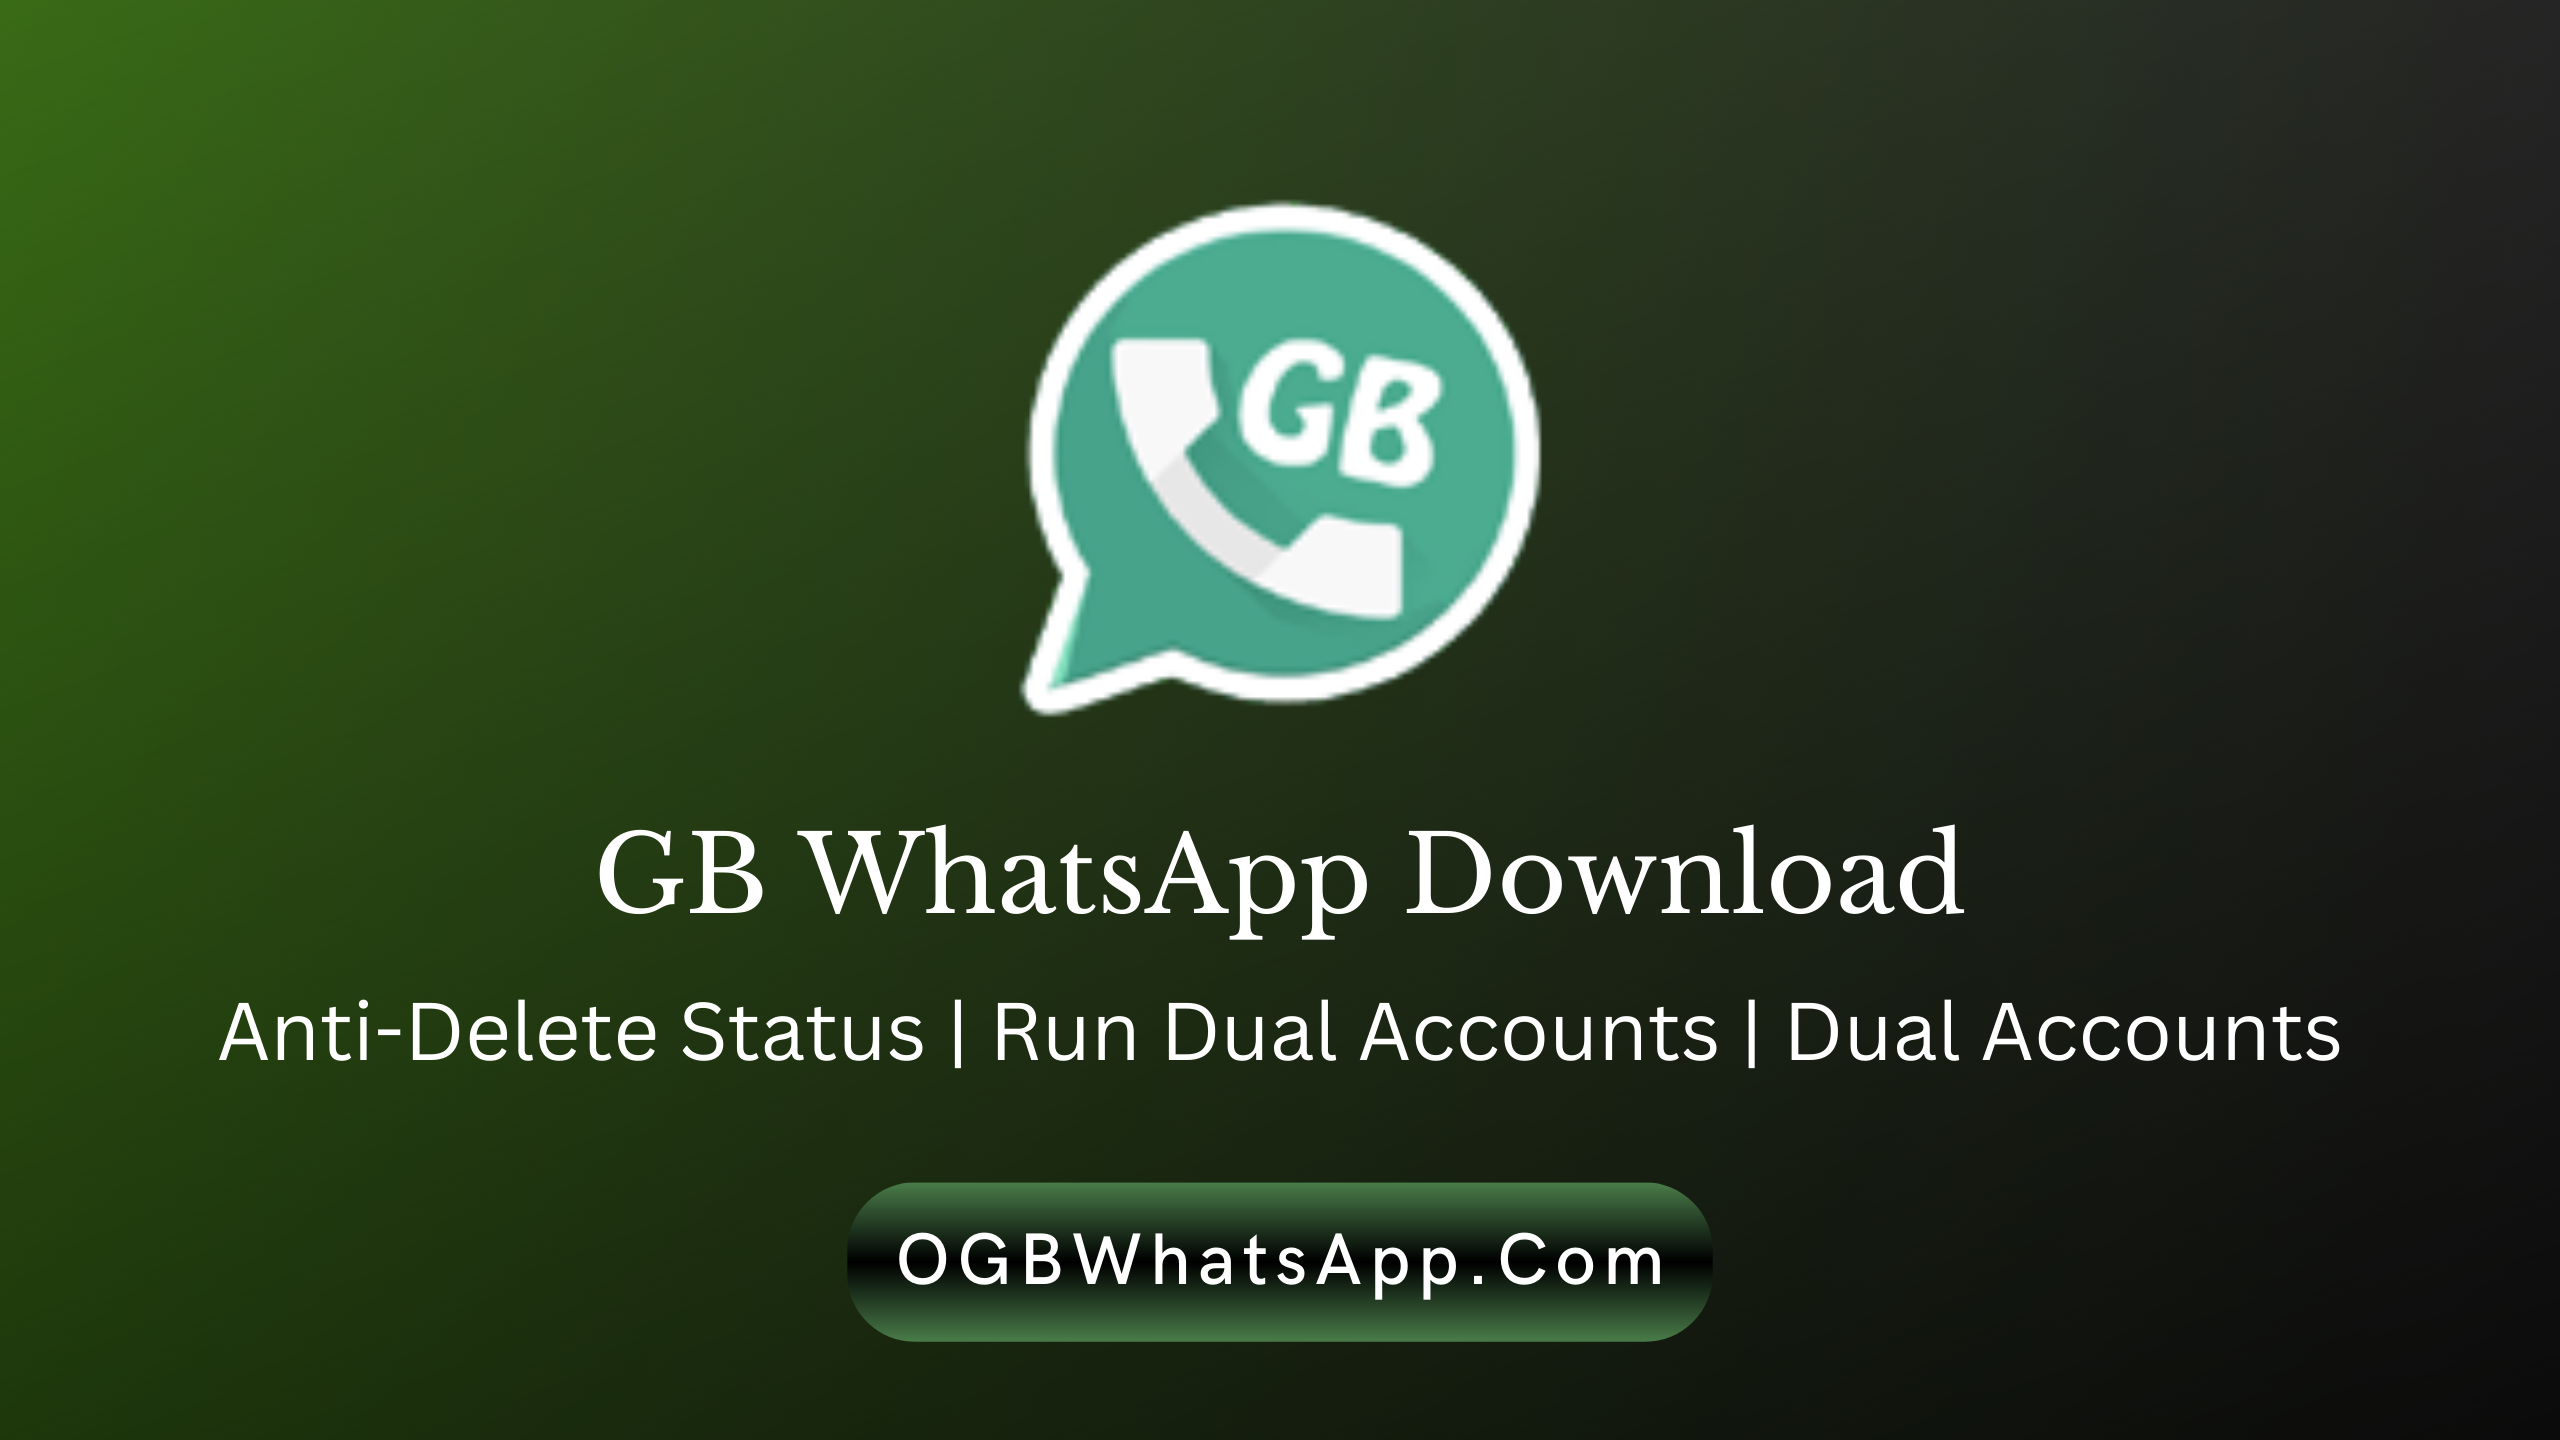 GB WhatsApp - Download GBWhatsApp APK (v17.40) Latest For Android | OFFICIAL